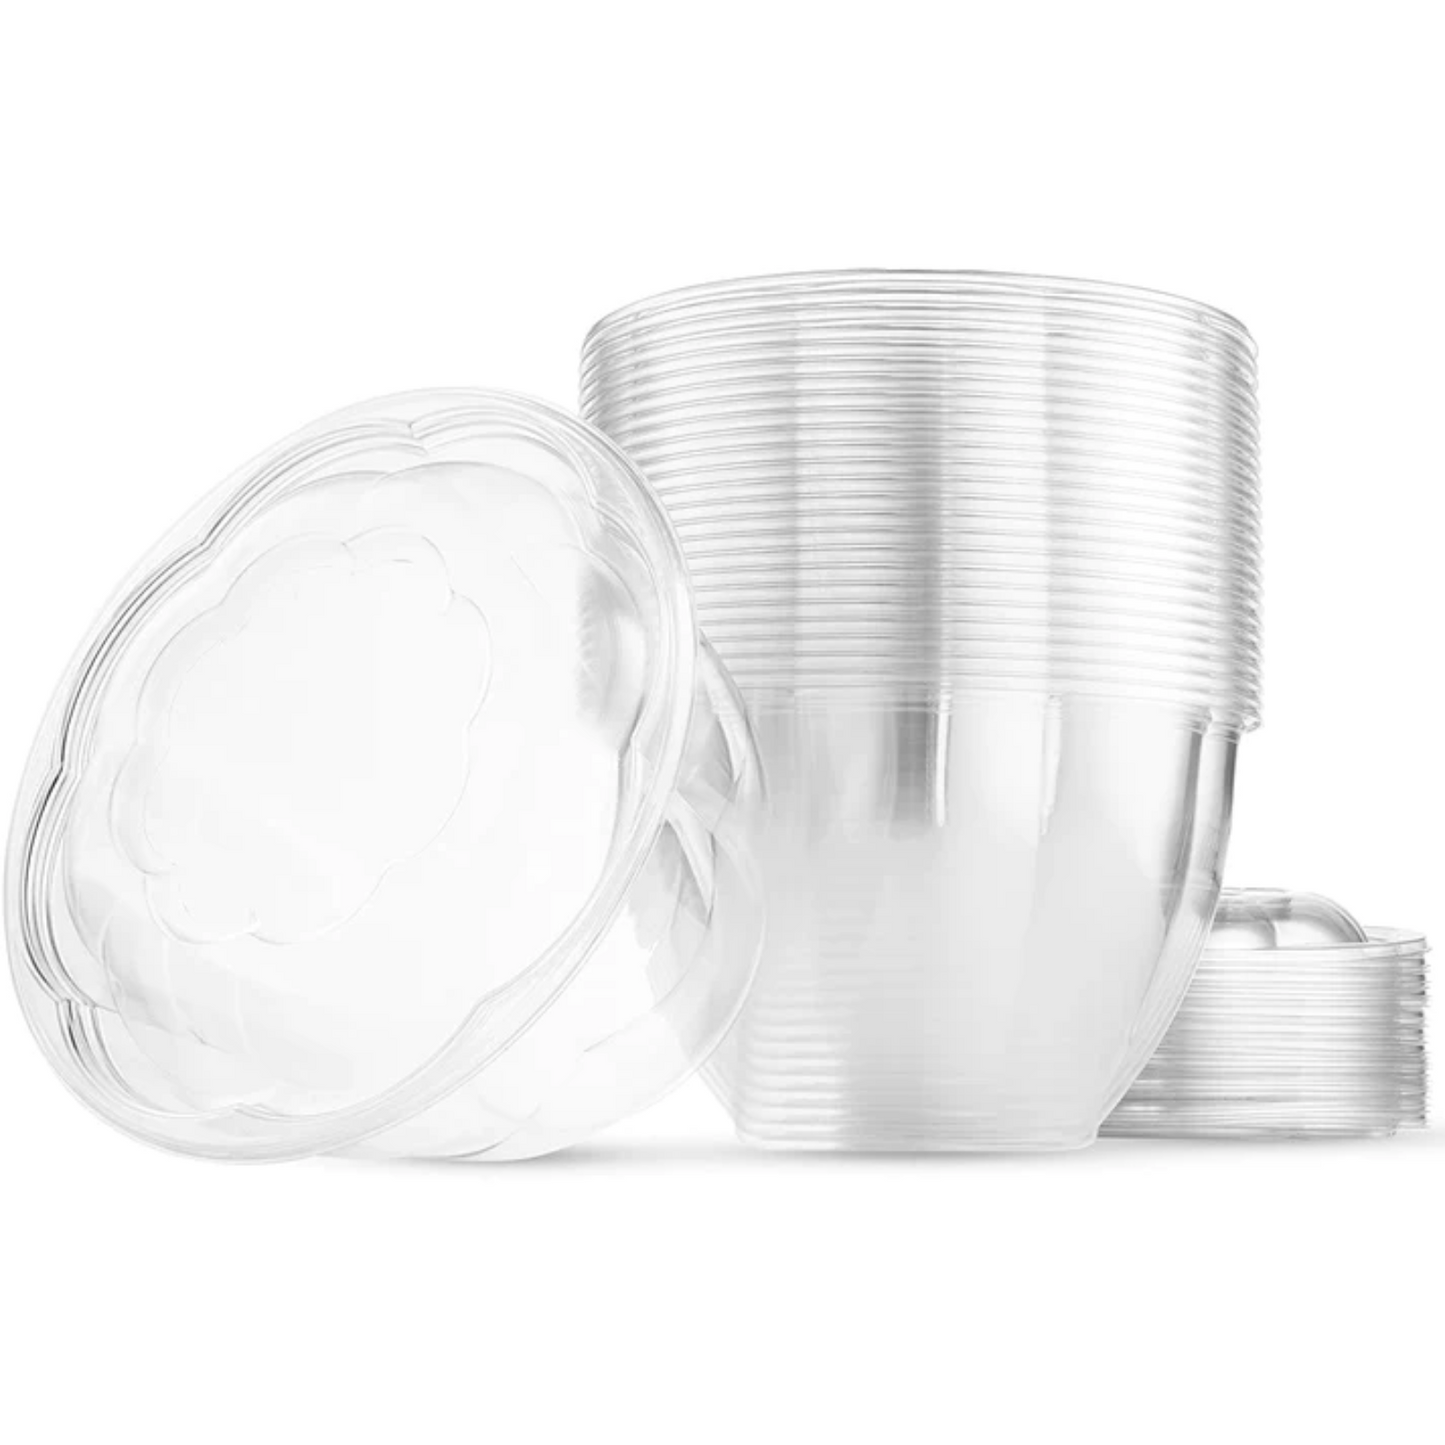 48oz Disposable Rose / Salad Bowls To-Go Containers with Airtight Lids Smoothie Cups VeZee   